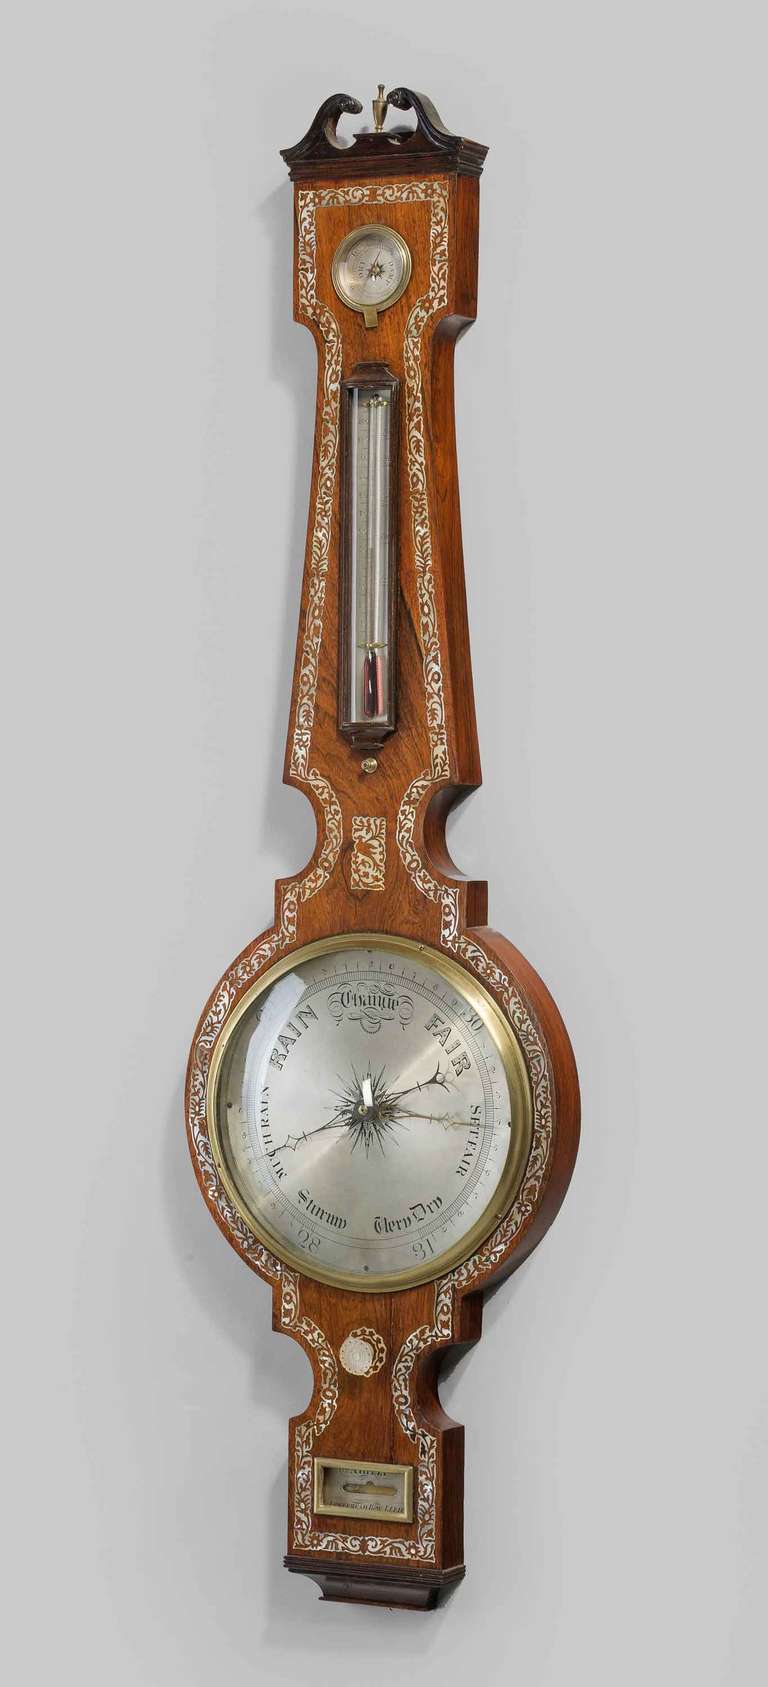 A very fine late Regency period ten in dial barometer by Arizzi of Leeds, with mother-of-pearl decoration, silvered dial, thermometer, hygrometer, spirit level, having a swan neck pediment with a brass finial.

Arizzi. Lower head row. Leeds,